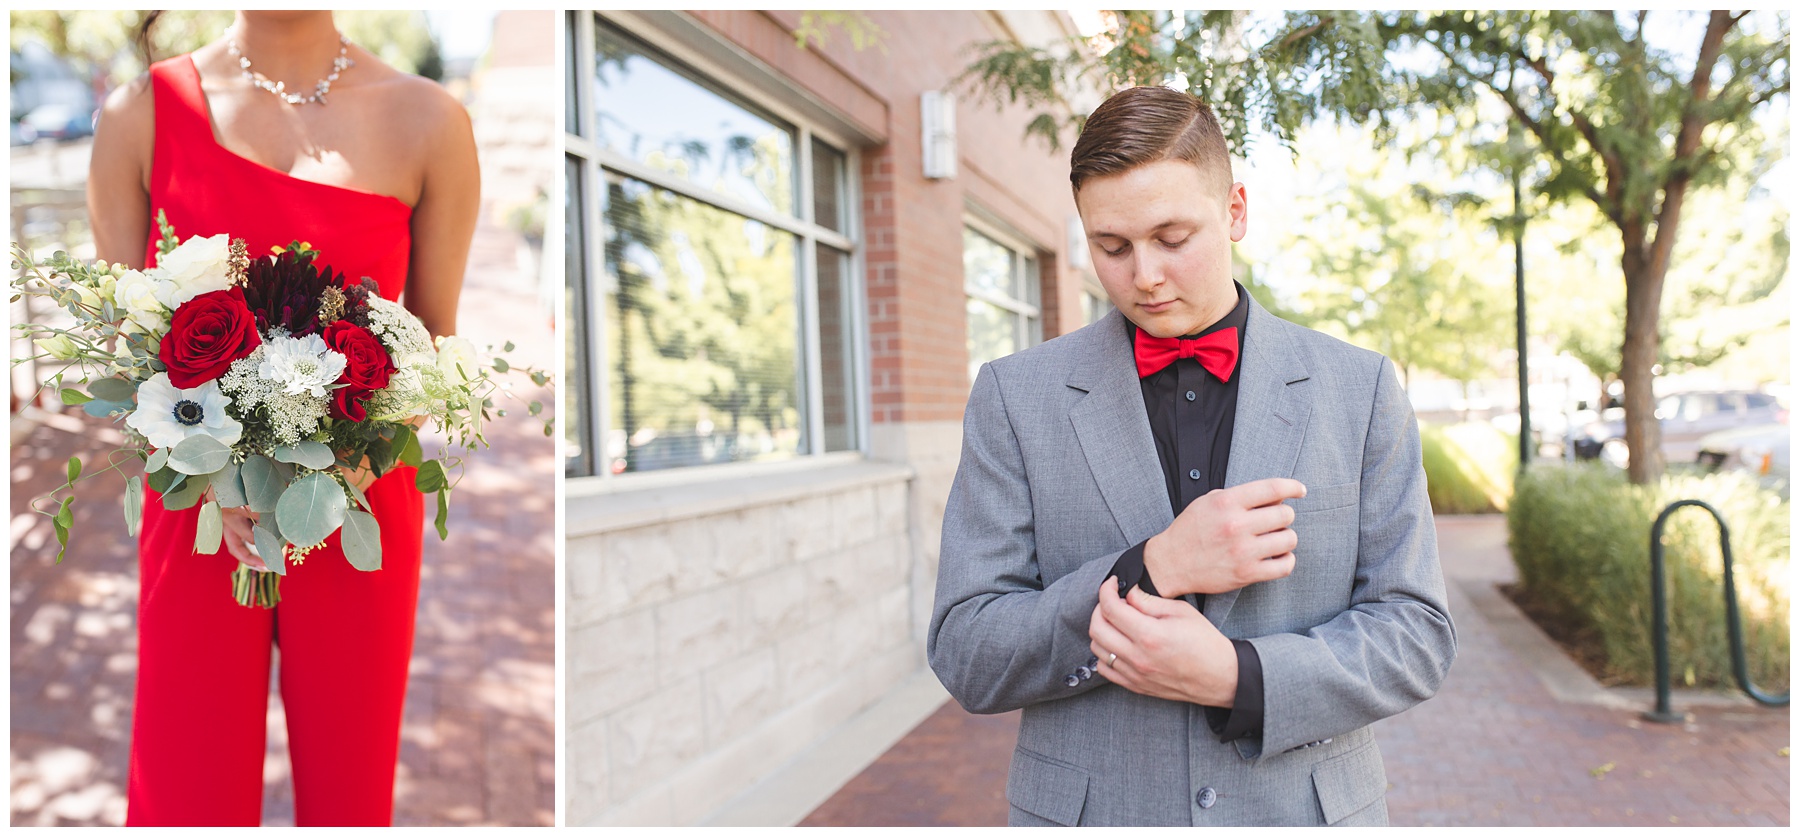 Natural light and natural skin tones Courthouse wedding in Boise, Idaho Miranda Renee Photography